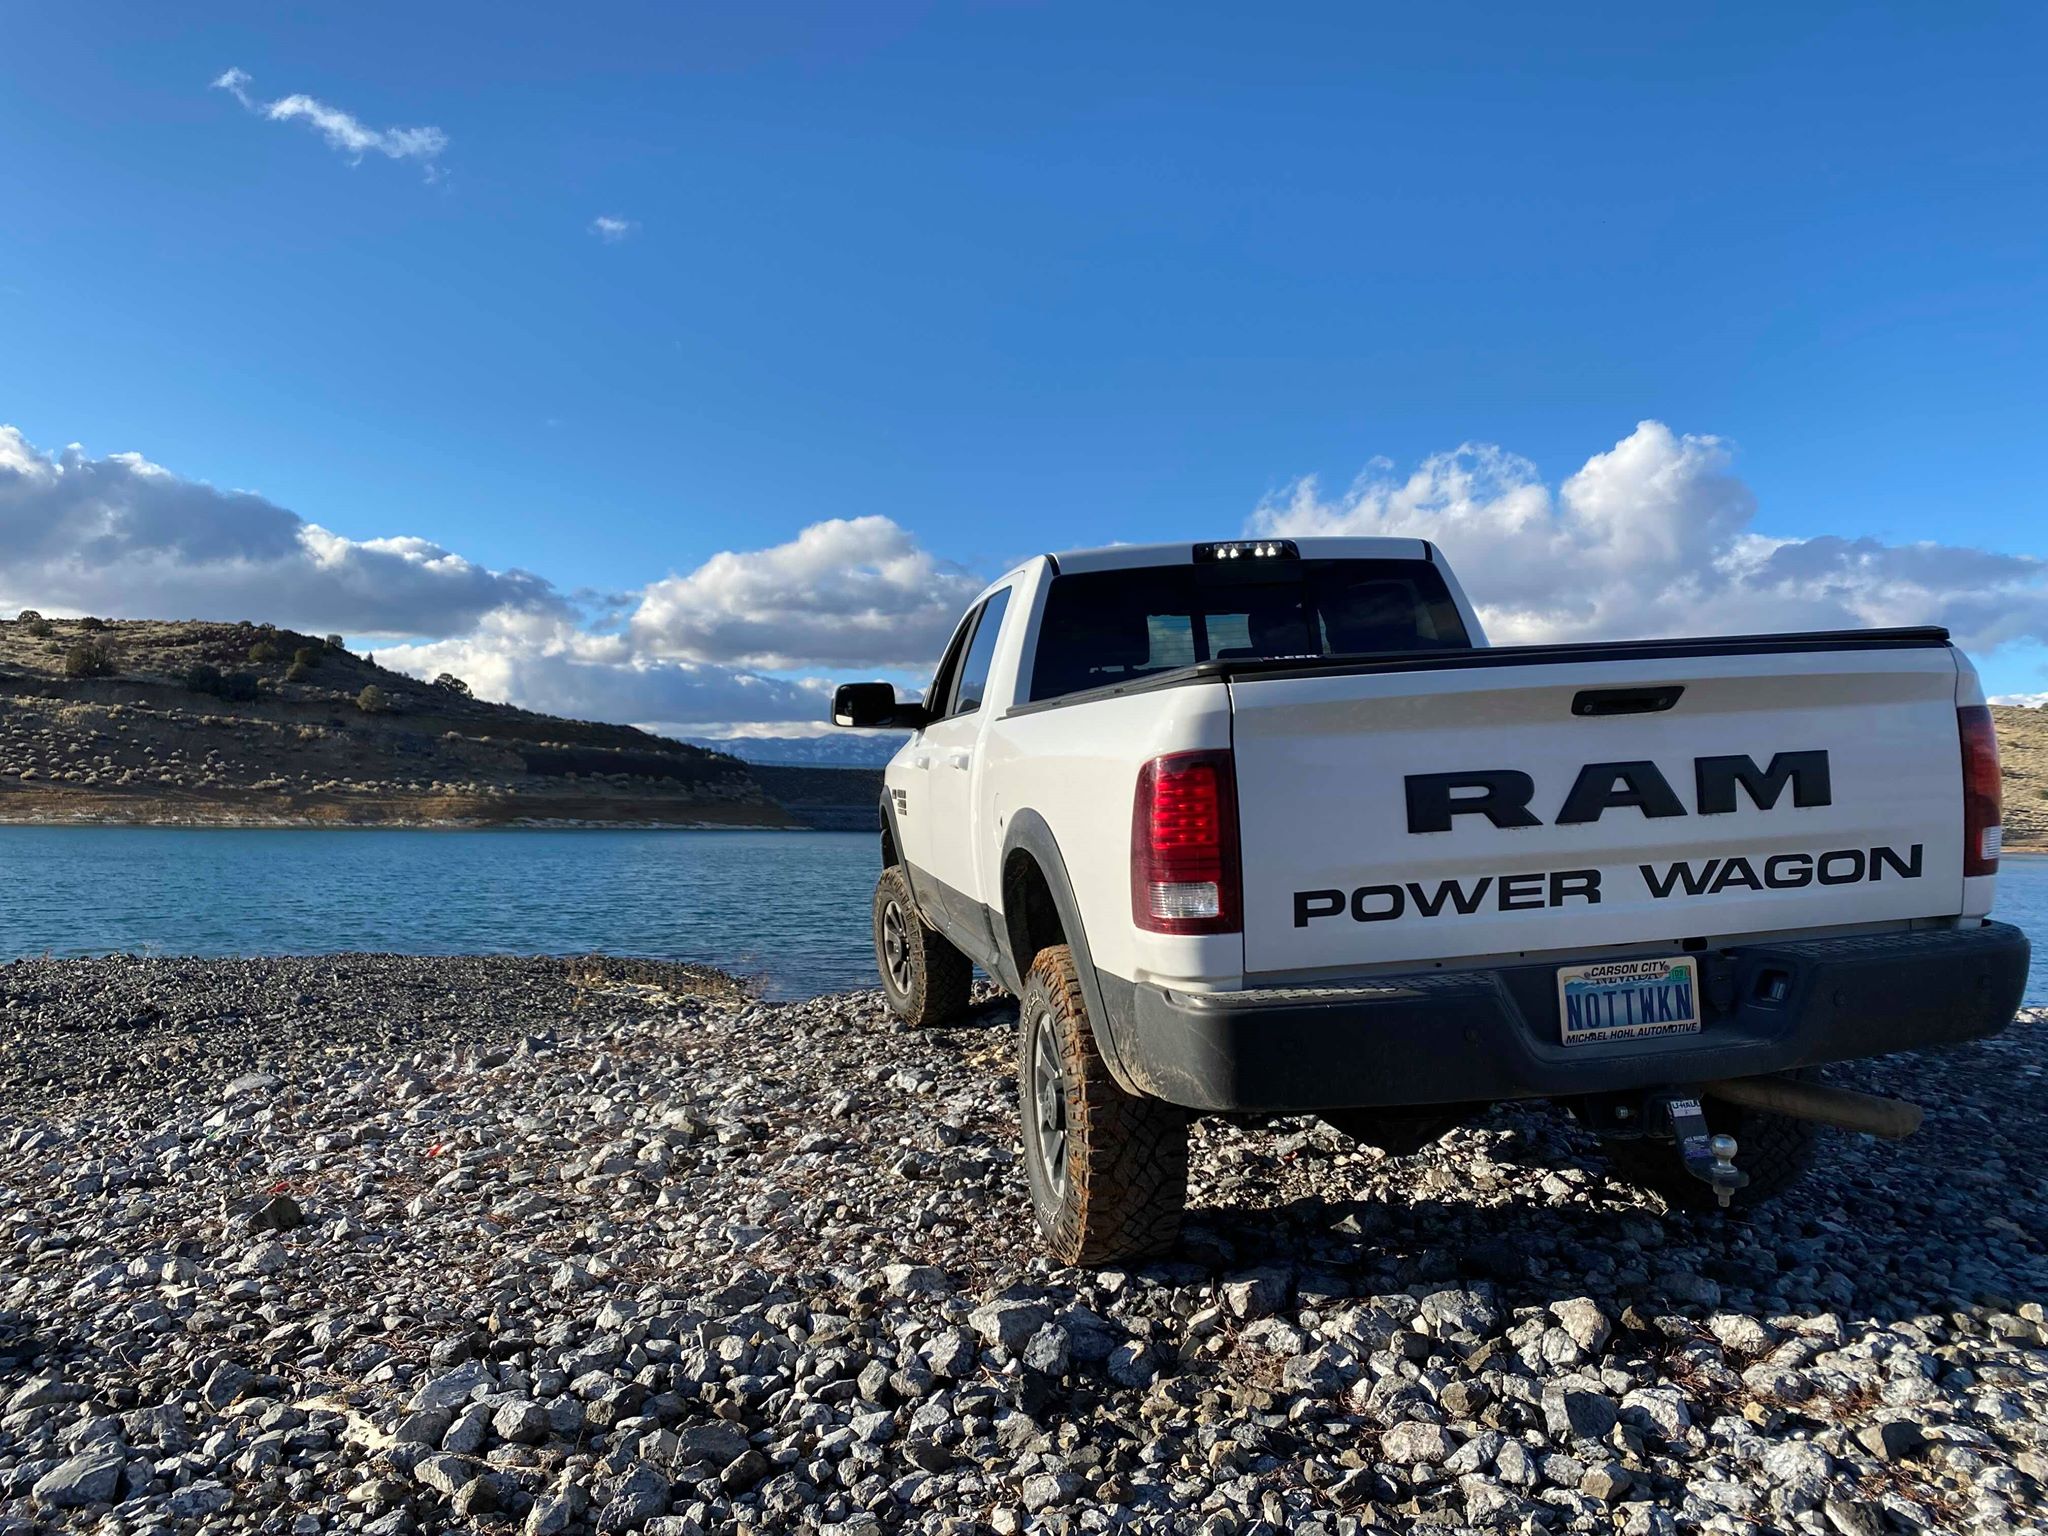 The pond and Power Wagon